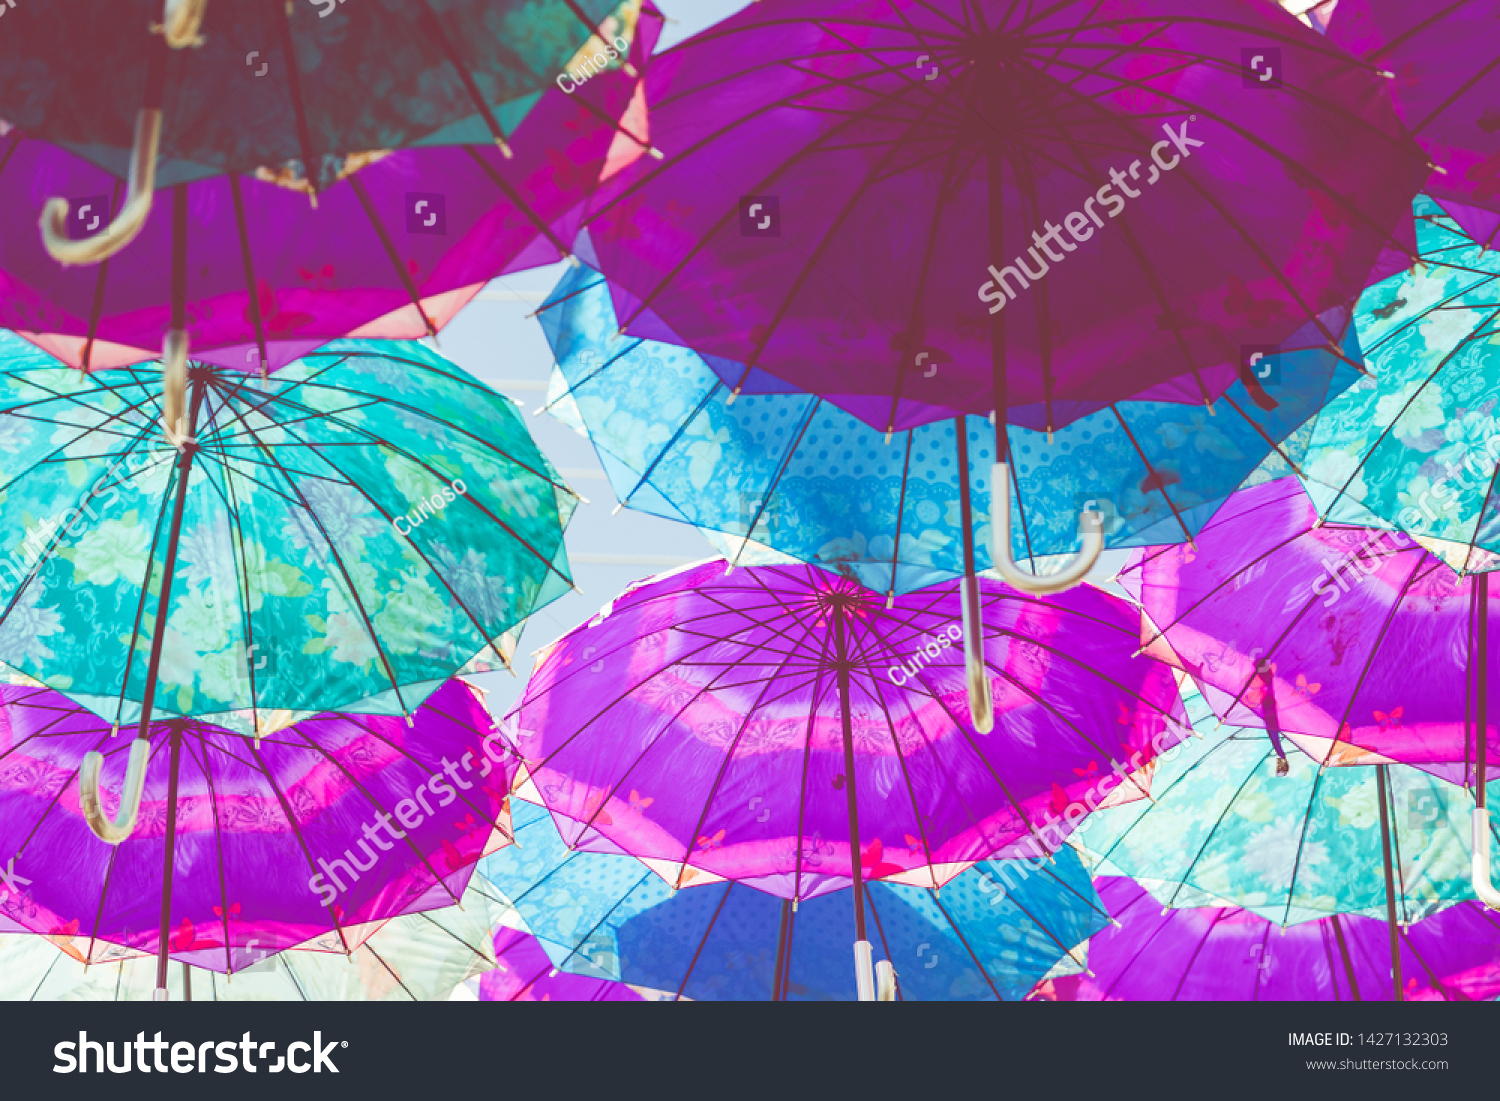 Colorful umbrellas background. Colorful umbrellas in the sky. Street decoration. #1427132303